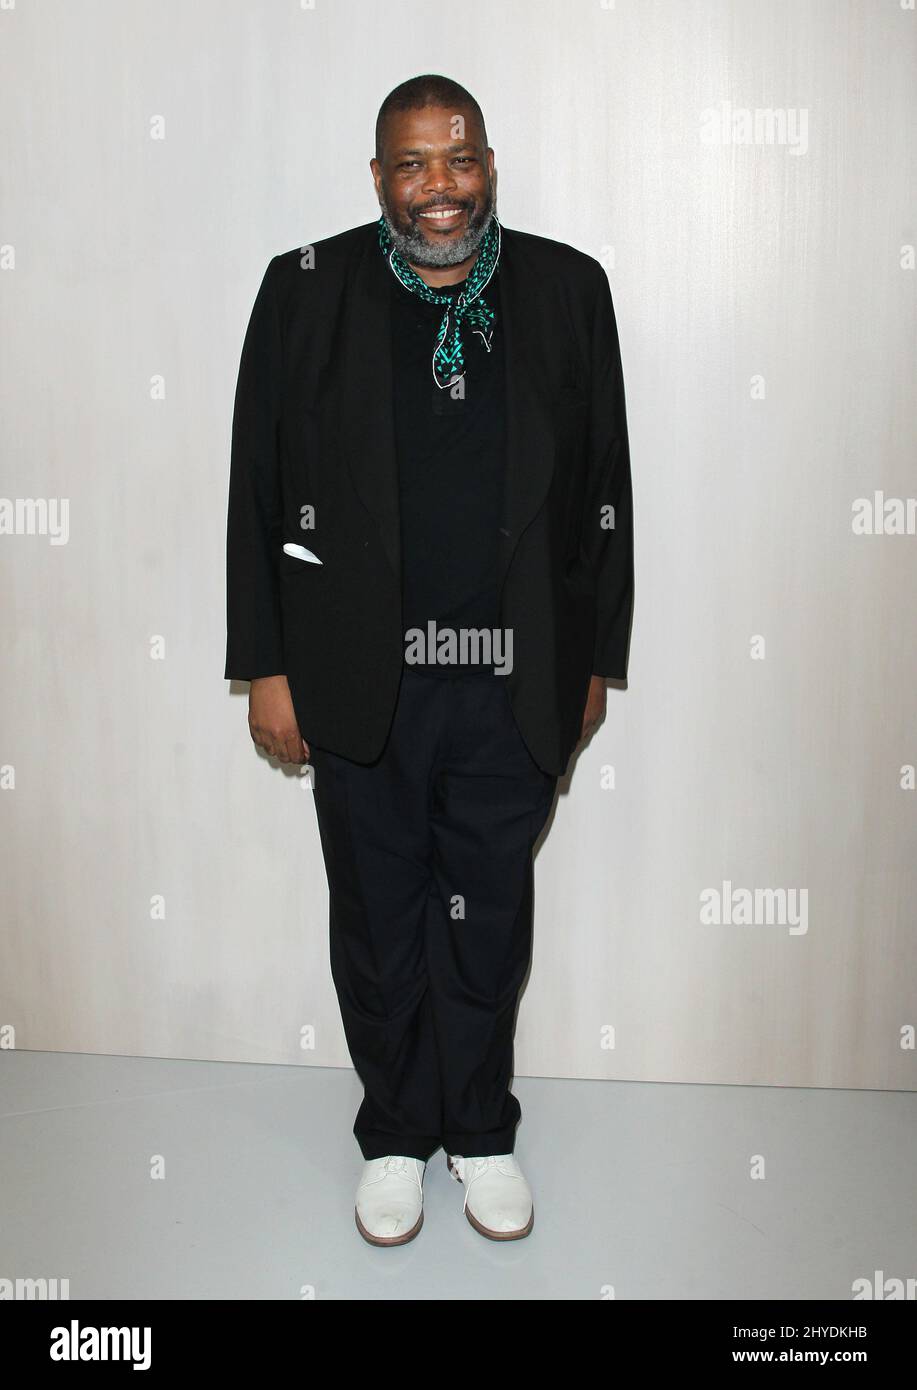 Hilton Als attending the Hammer Museum Gala In The Garden honoring Ava DuVernay and Hilton Als sponsored by Bottega Veneta at the Hammer Museum in Los Angeles, USA Stock Photo